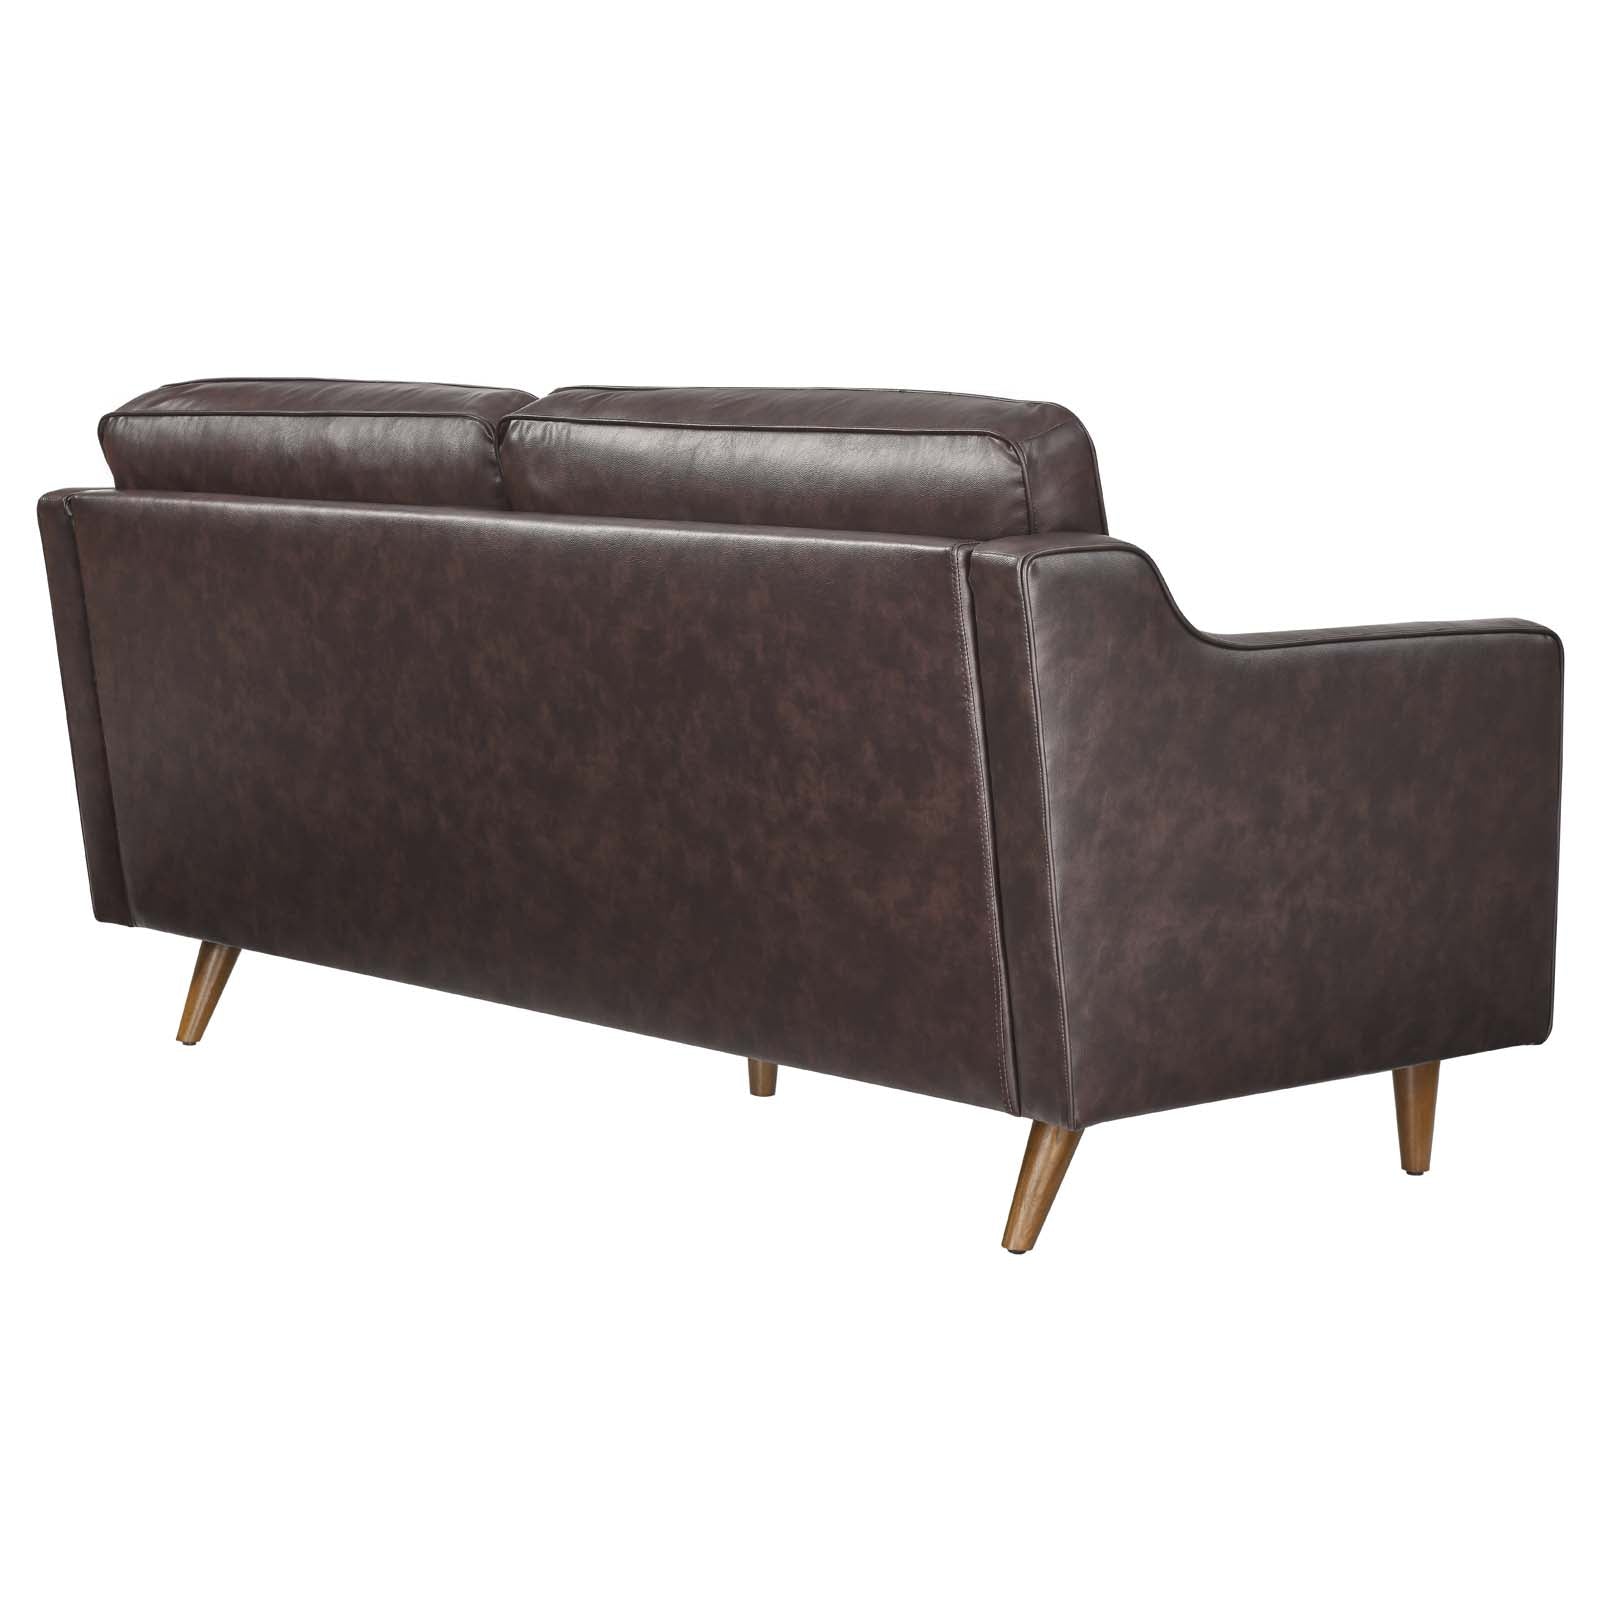 Modway Sofas & Couches - Impart Genuine Leather Sofa Brown